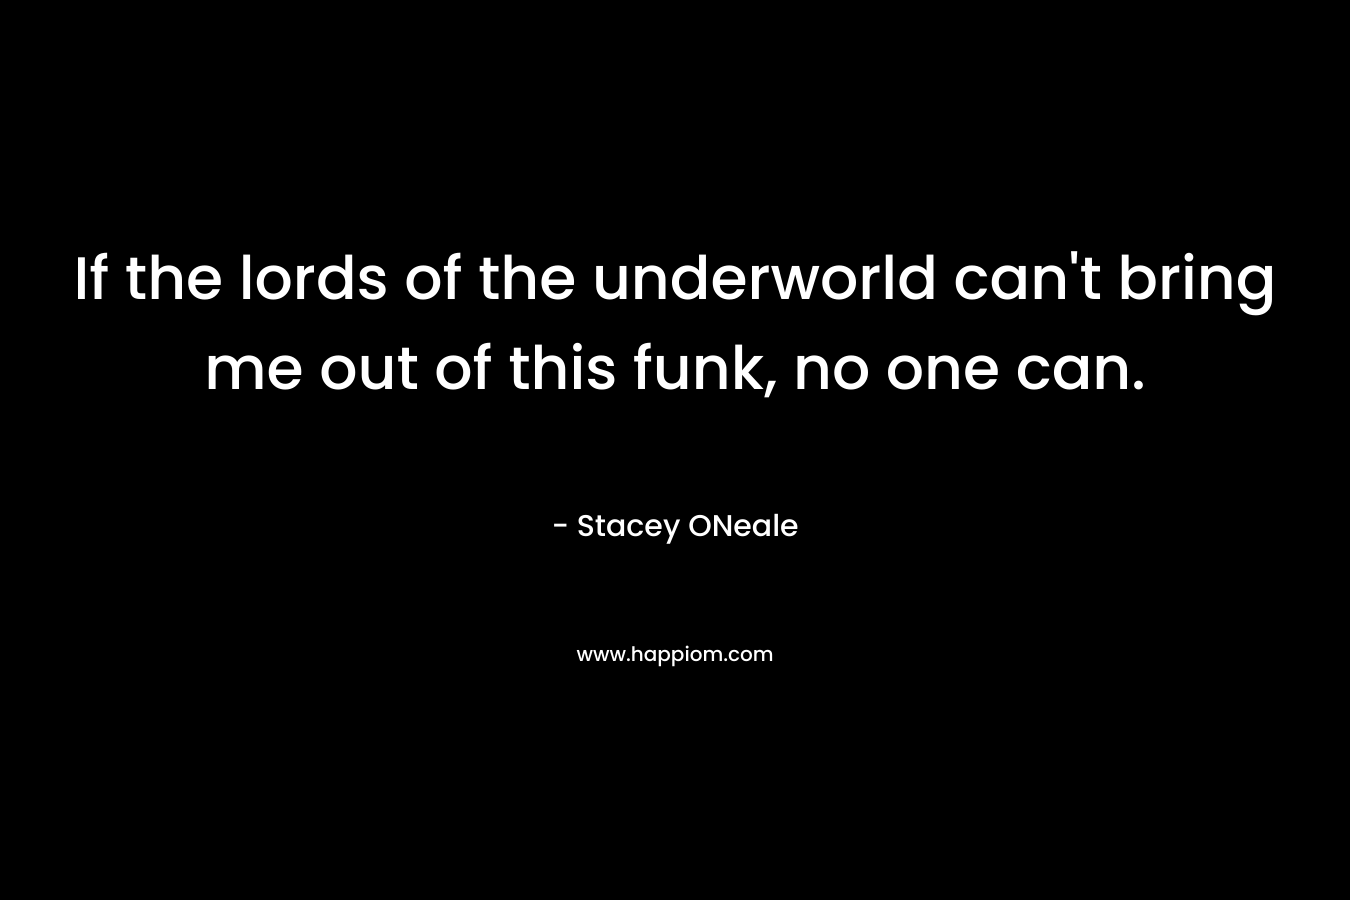 If the lords of the underworld can’t bring me out of this funk, no one can. – Stacey ONeale